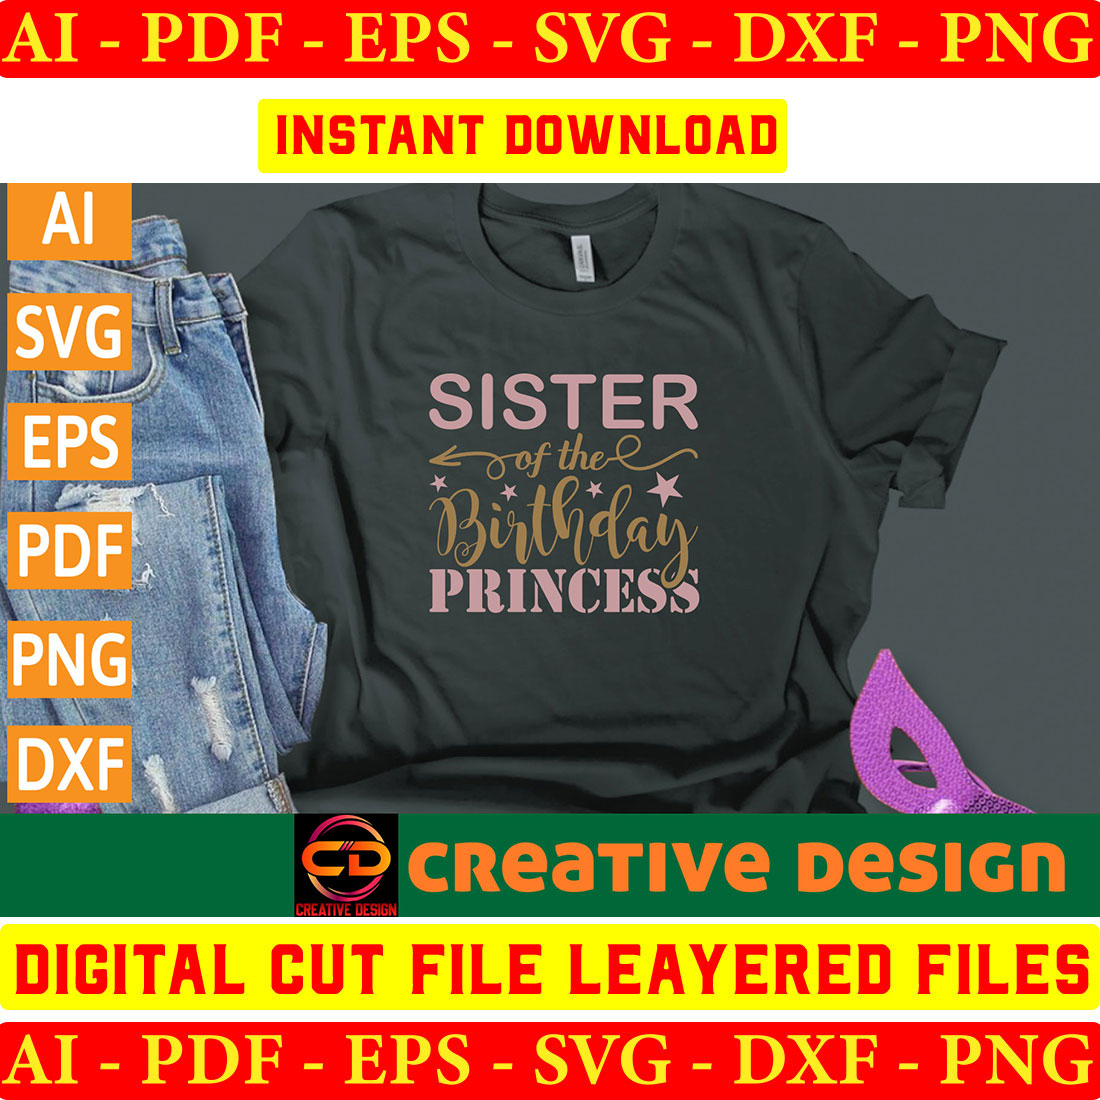 T - shirt that says sister of the birthday princess.